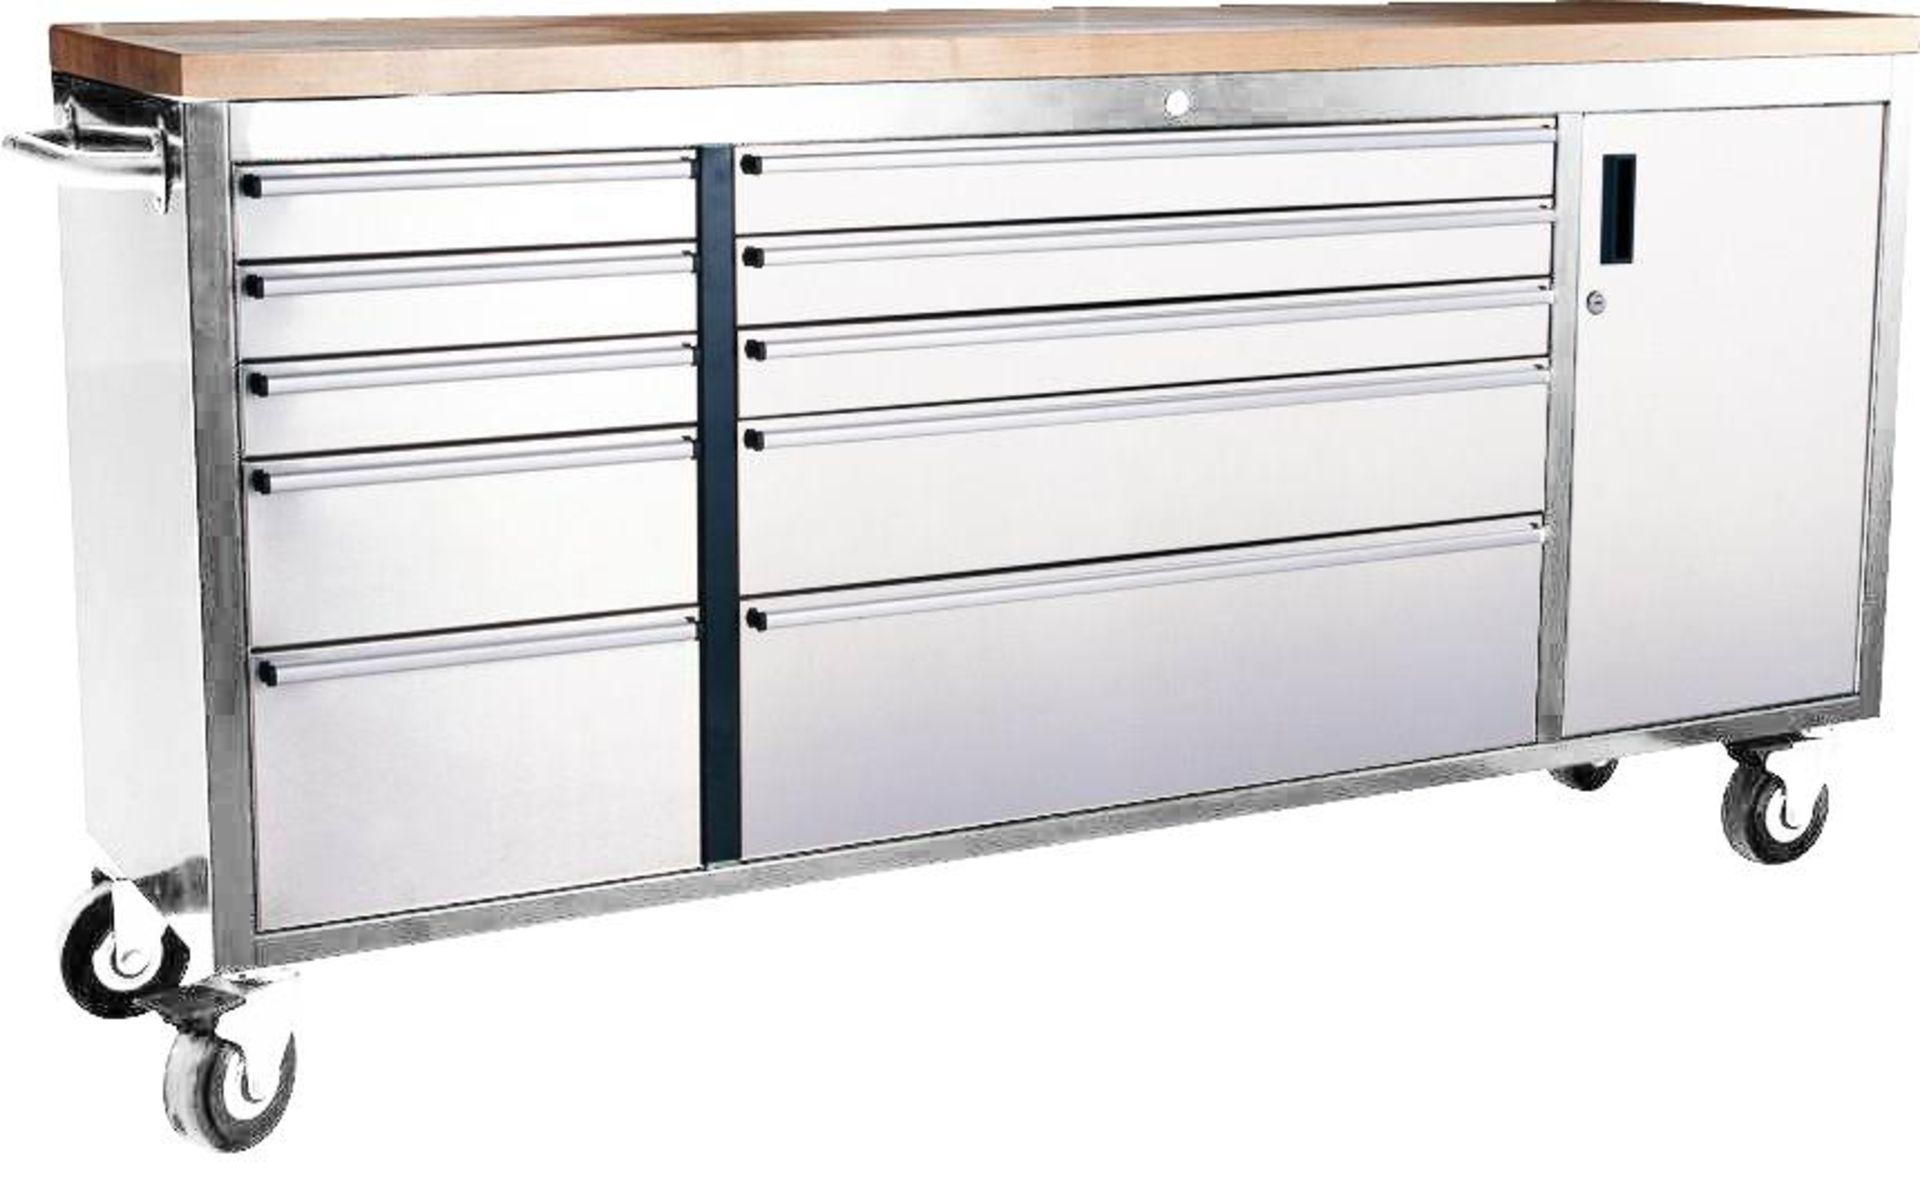 72 inch 10 draw stainless steel toolbox 1829mm W x 850mm H 460mm D NEW and BOXED Includes: